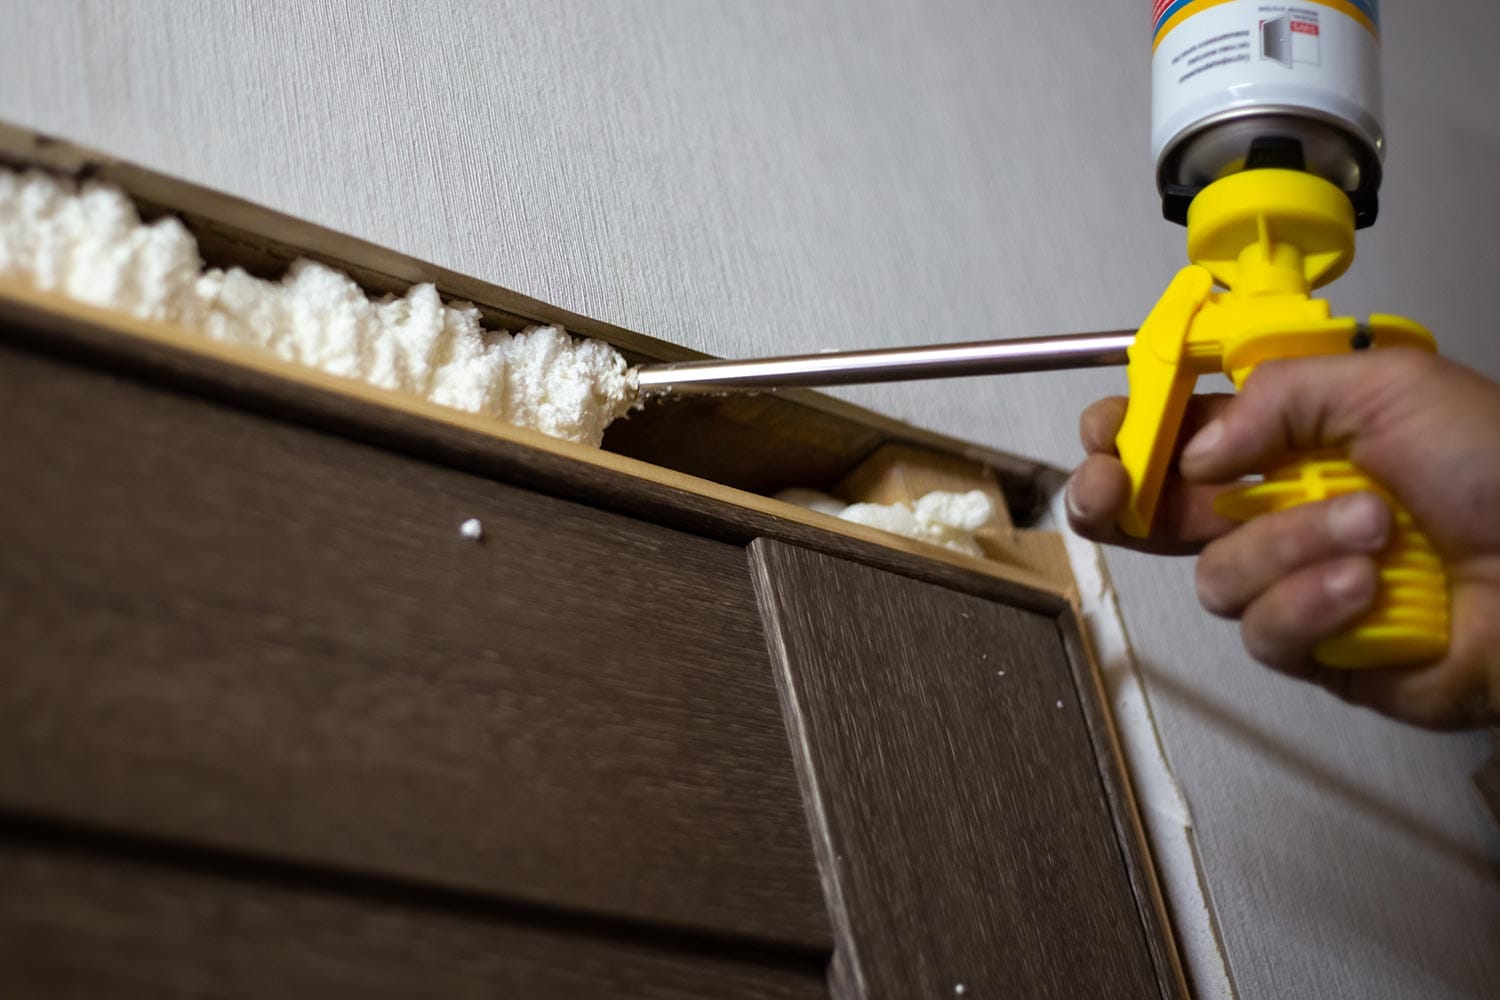 The master foams up the gaps between the door and the wall with polyurethane foam